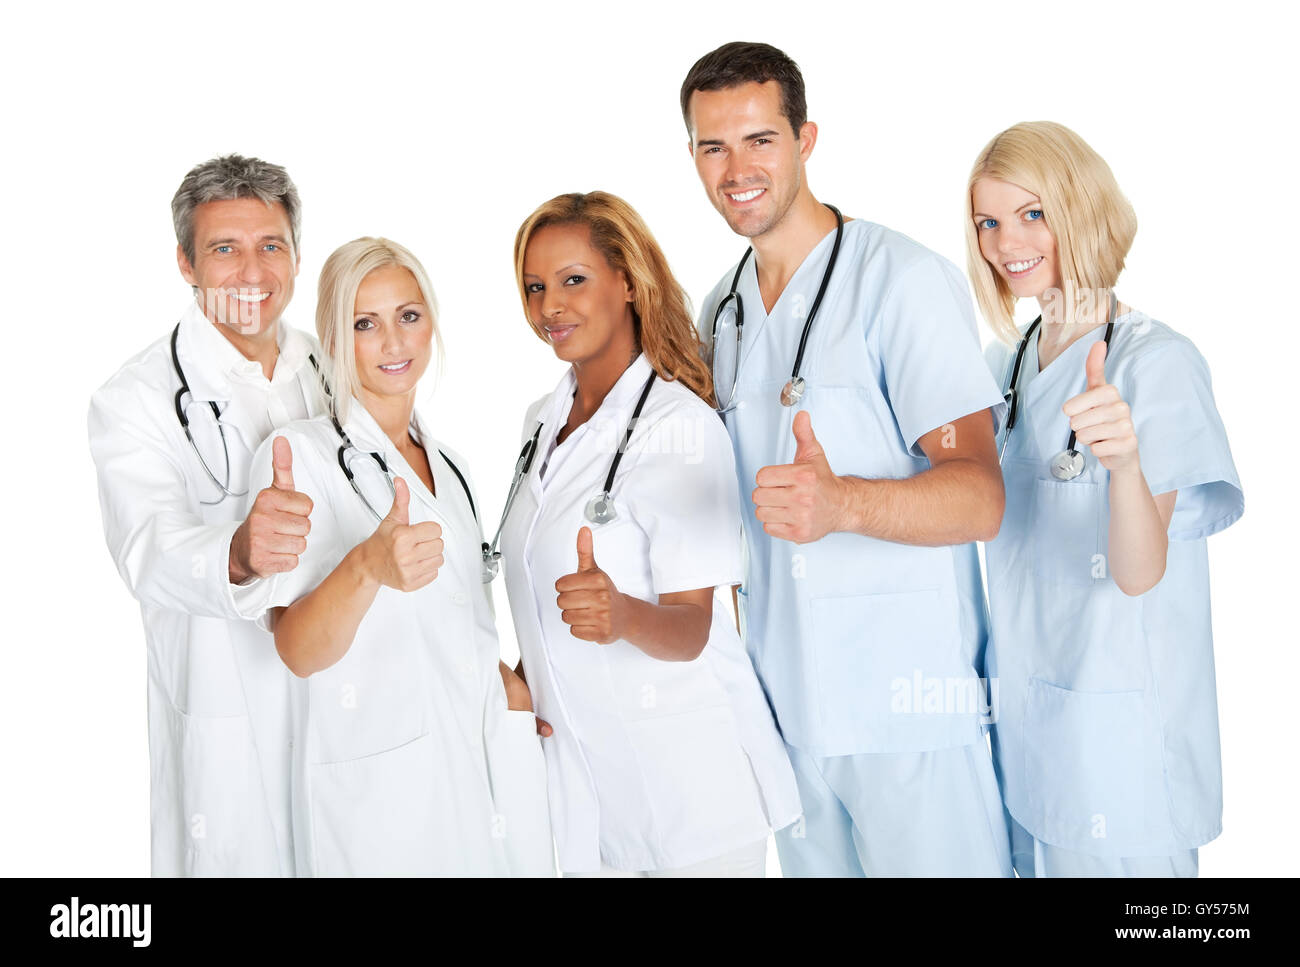 Friendly group of doctors with thumbs up on white Stock Photo